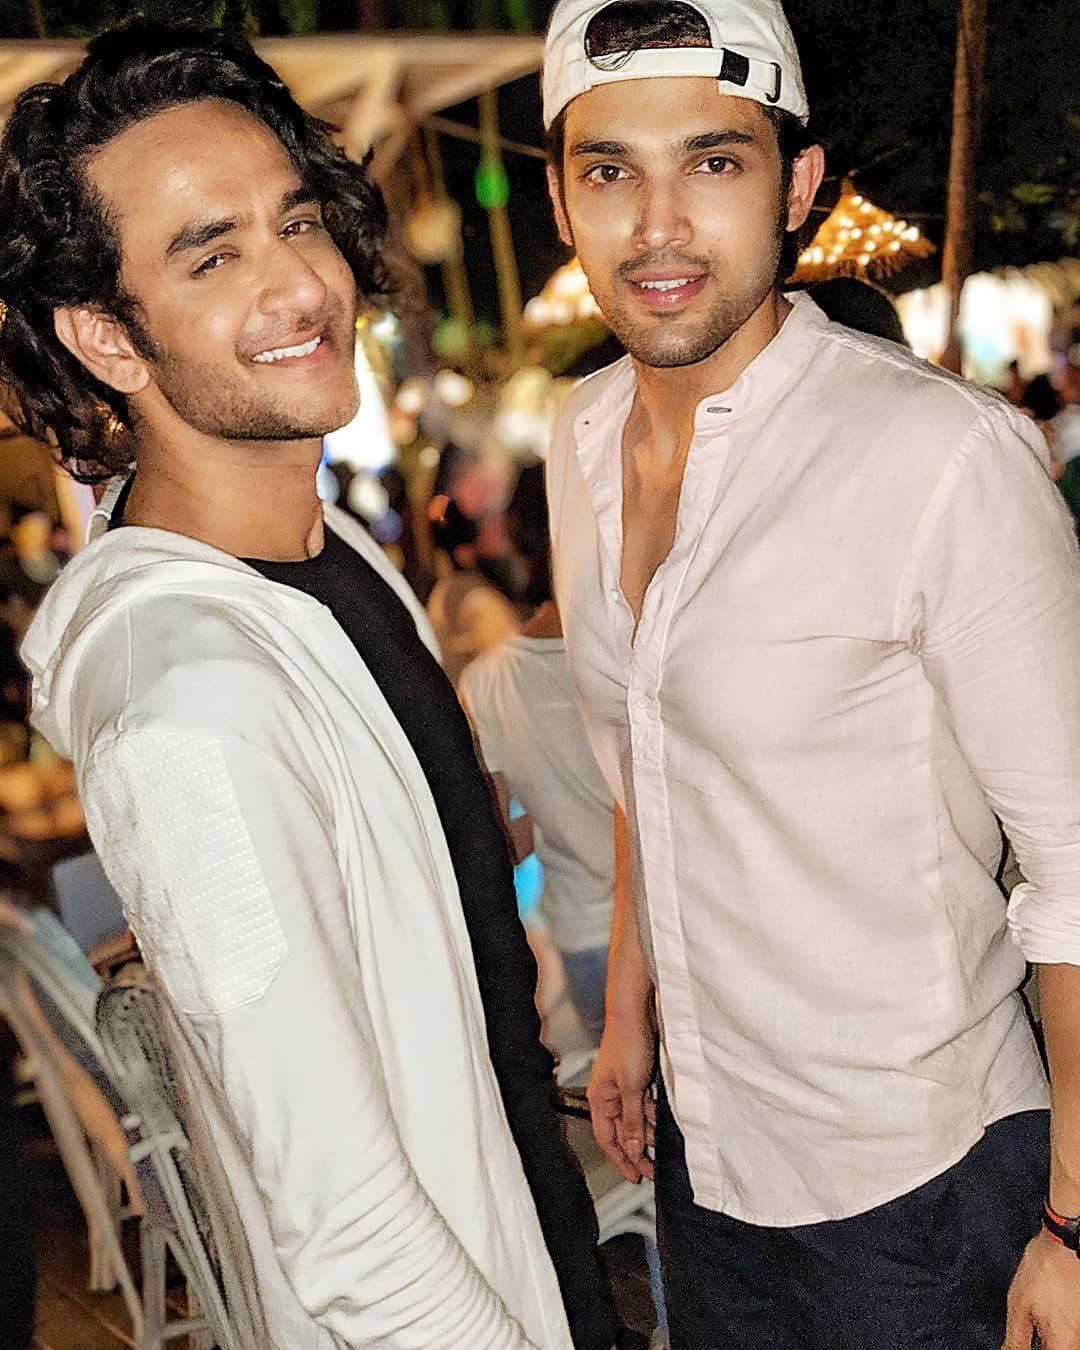 Here Is What Vikas Gupta Has To Say About Unfollowing Parth Samthaan On Social Media!